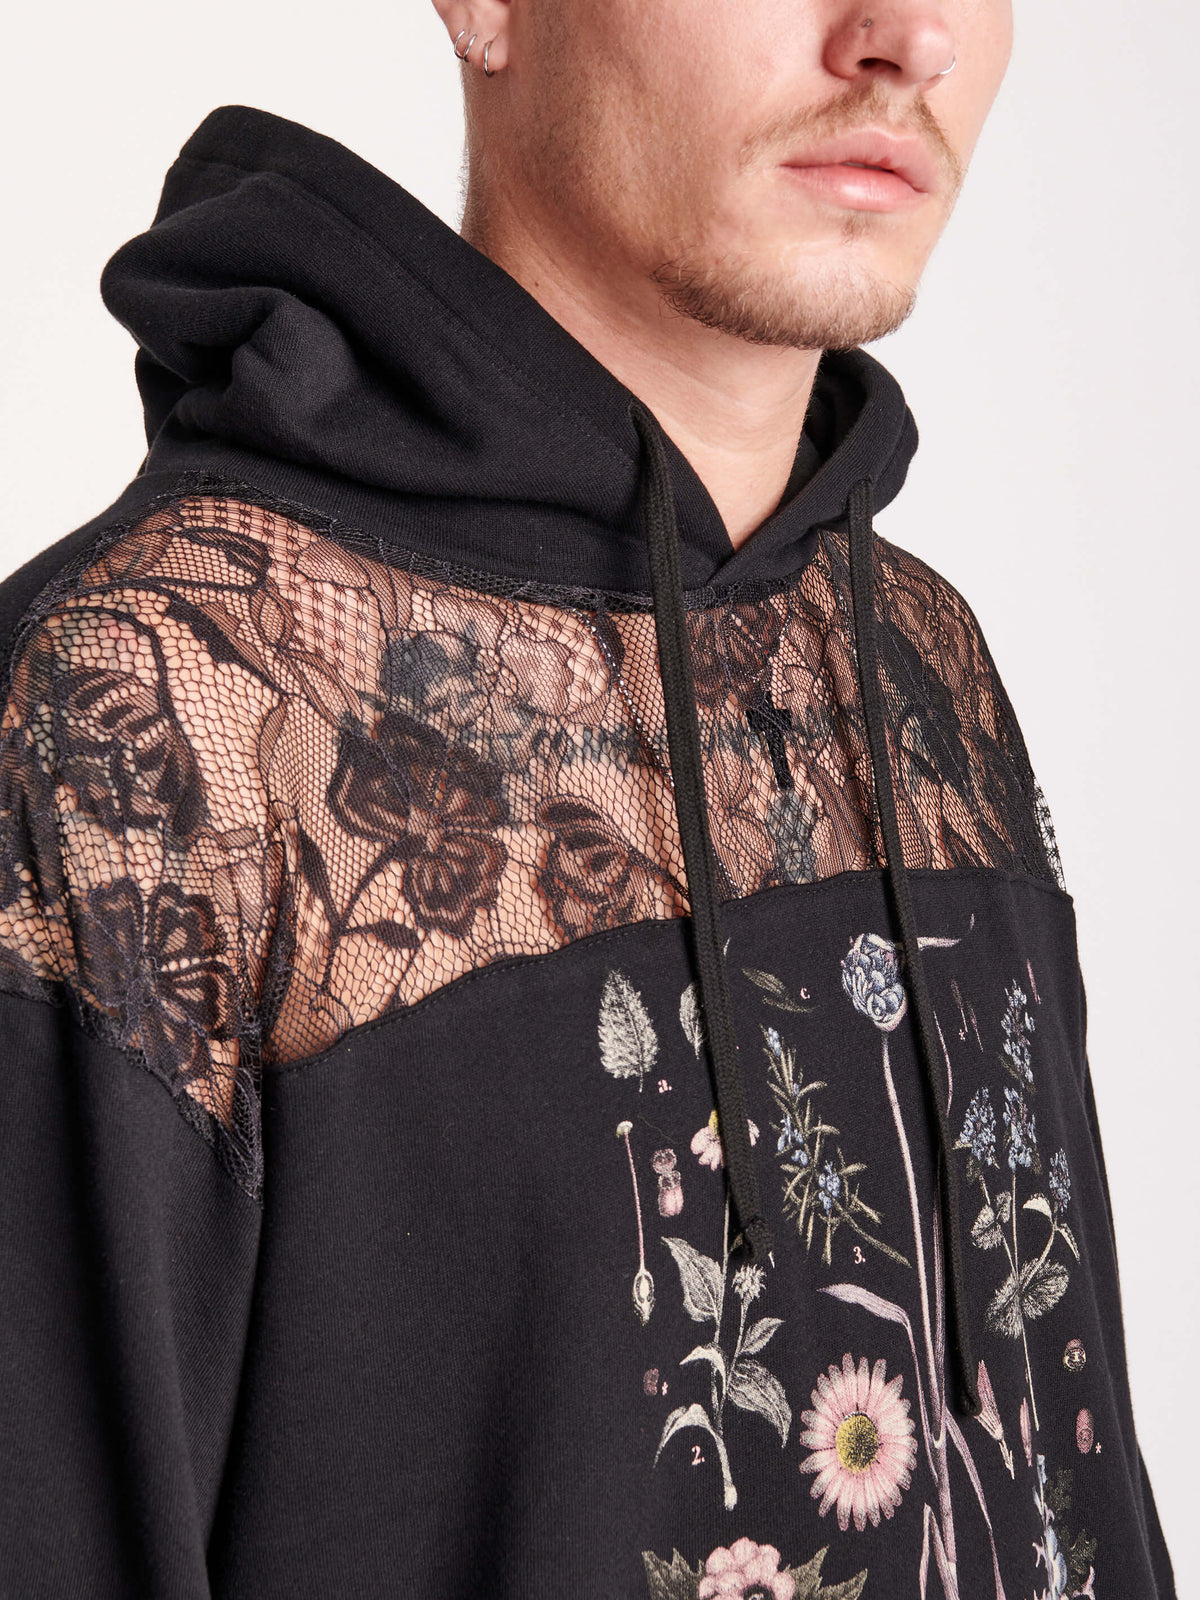 lace and magical herb hoodie